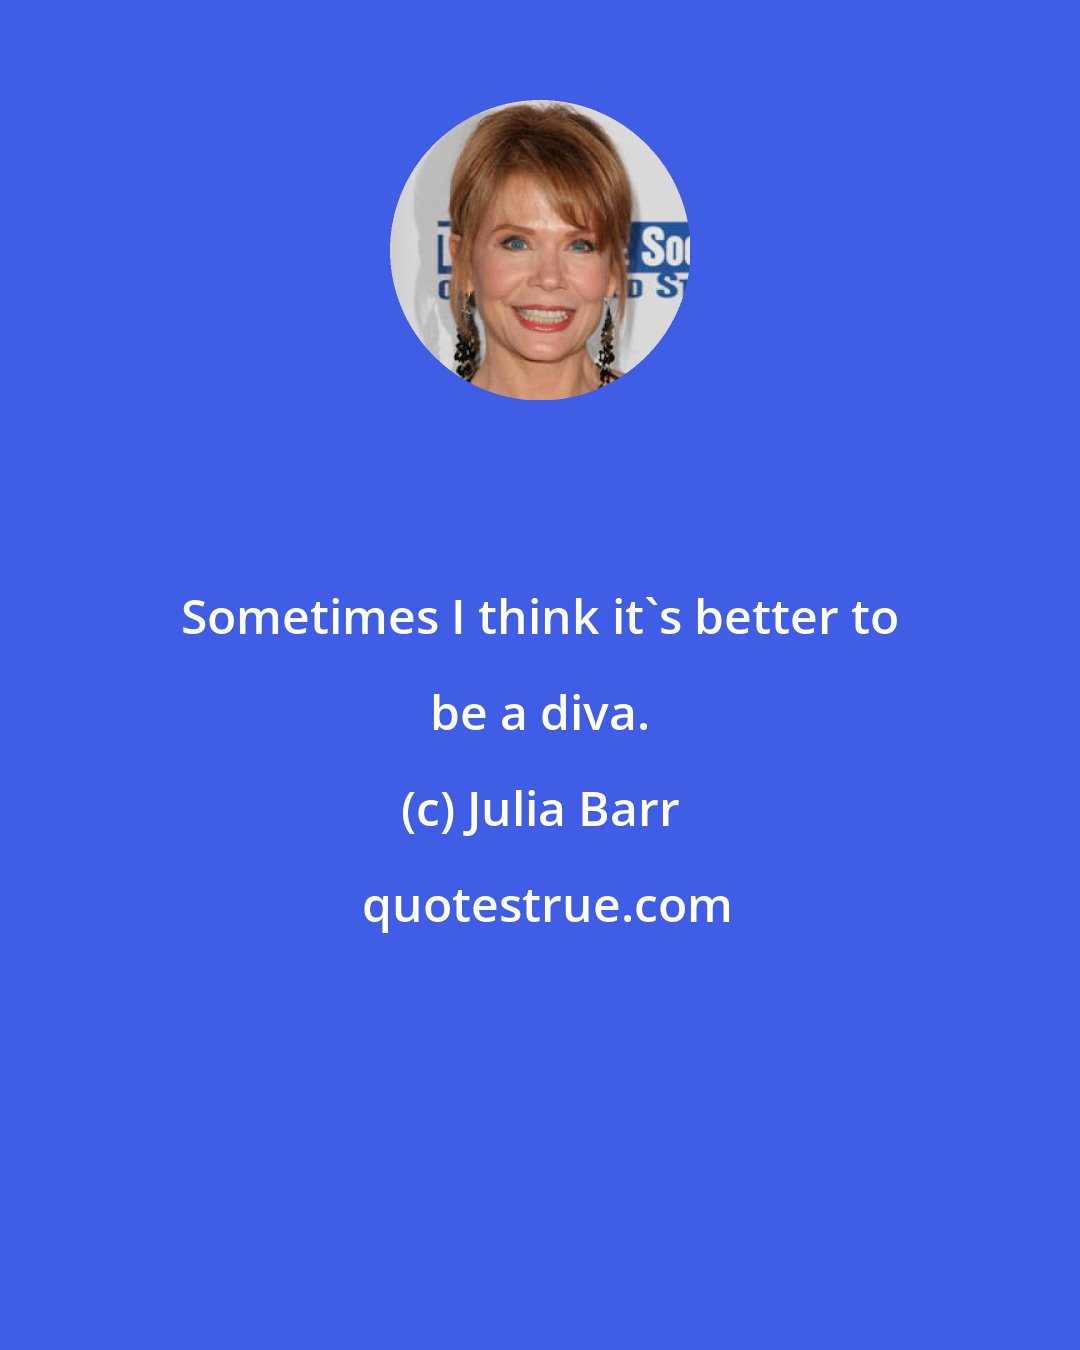 Julia Barr: Sometimes I think it's better to be a diva.